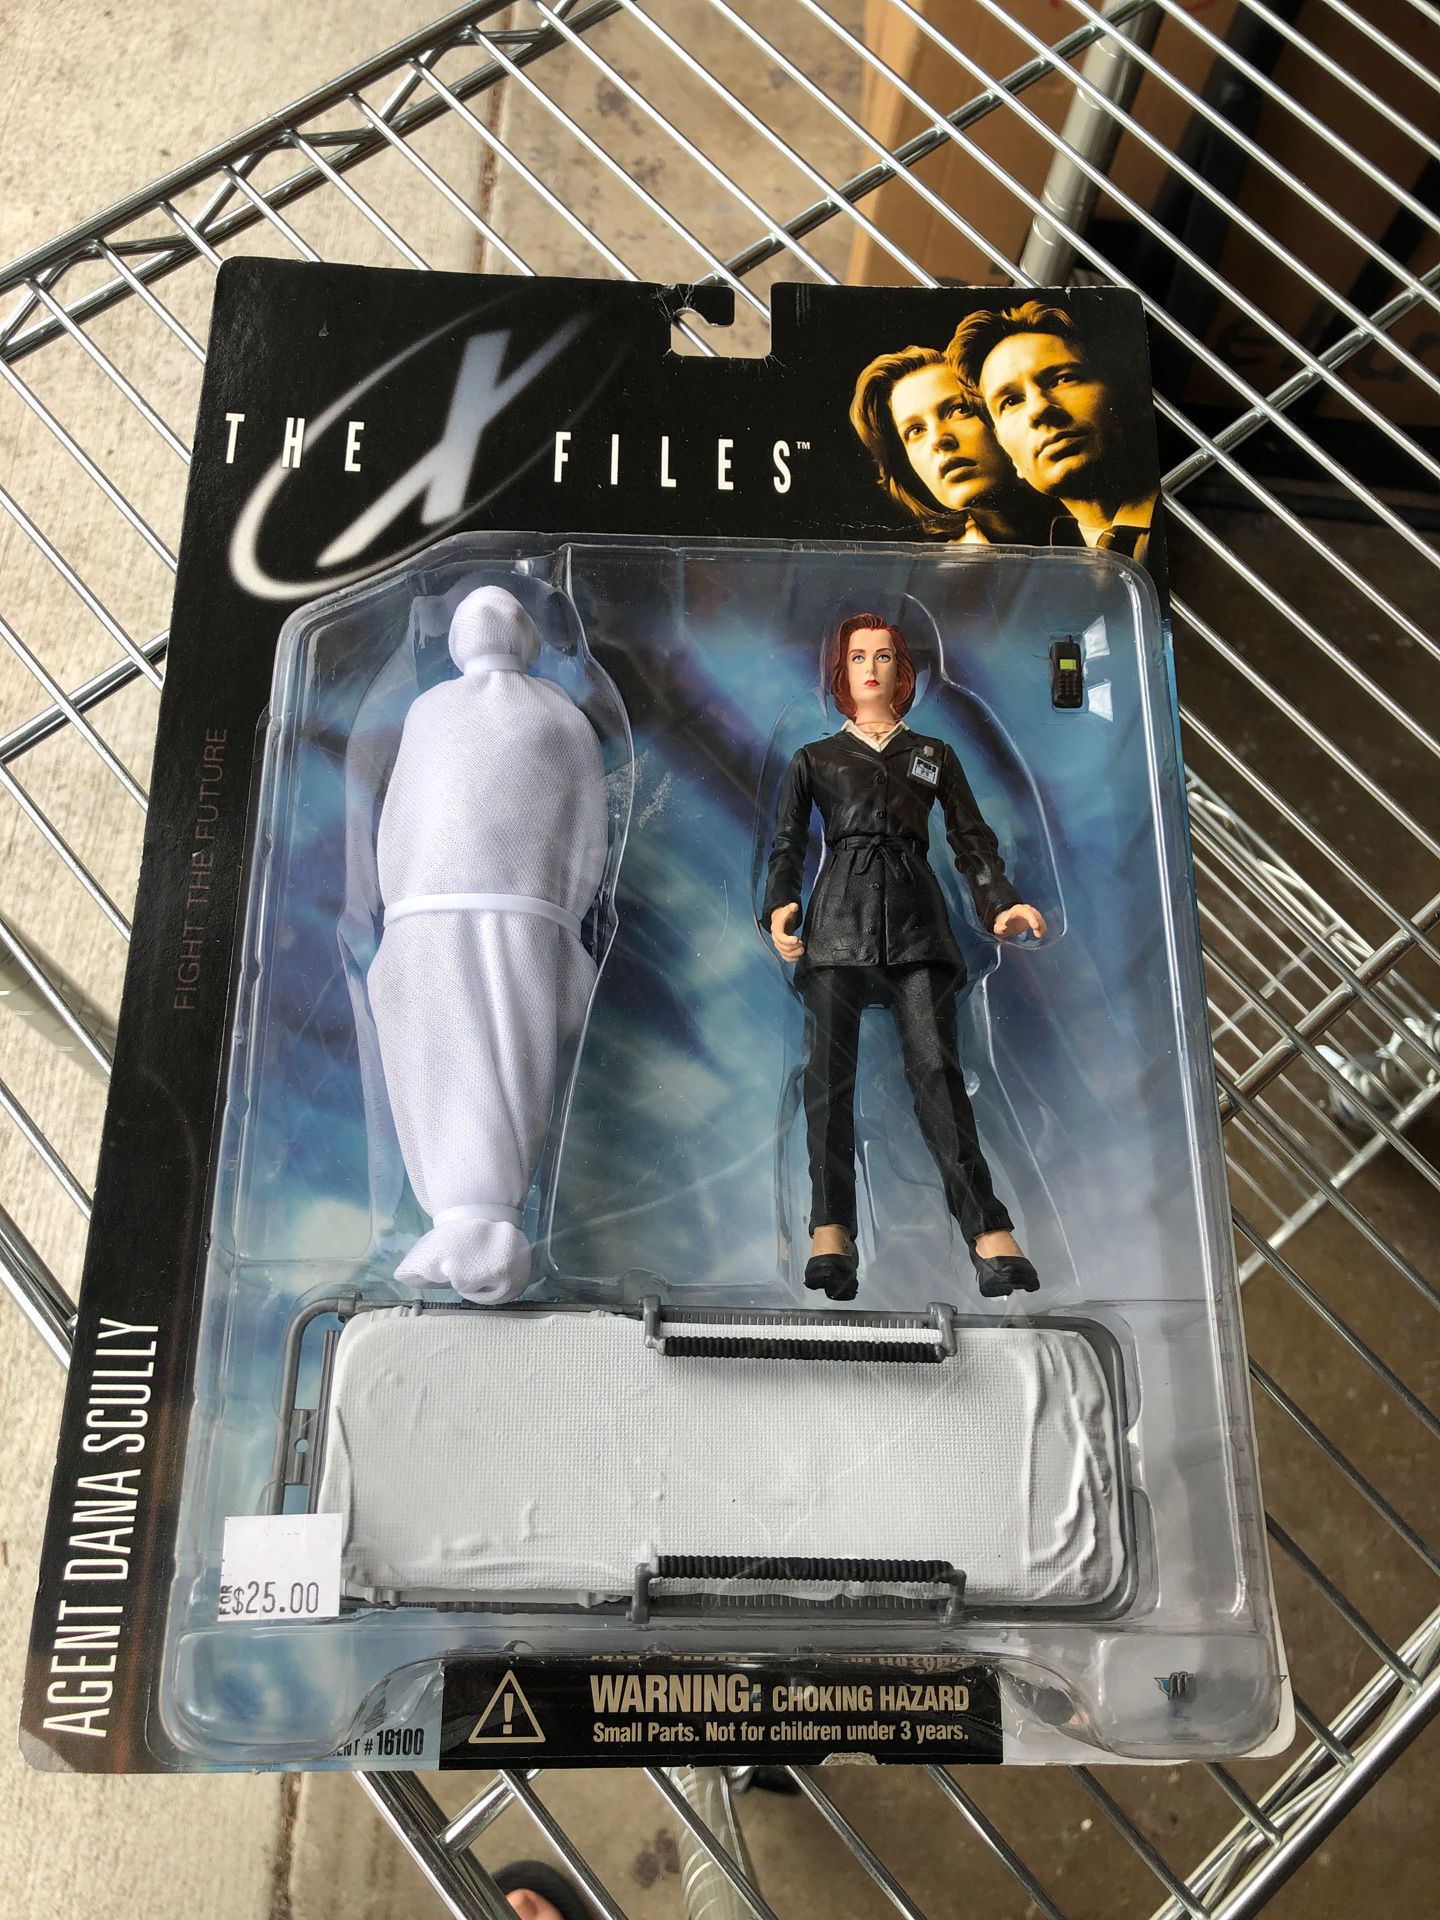 1998 Agent Scully action figure - XFiles